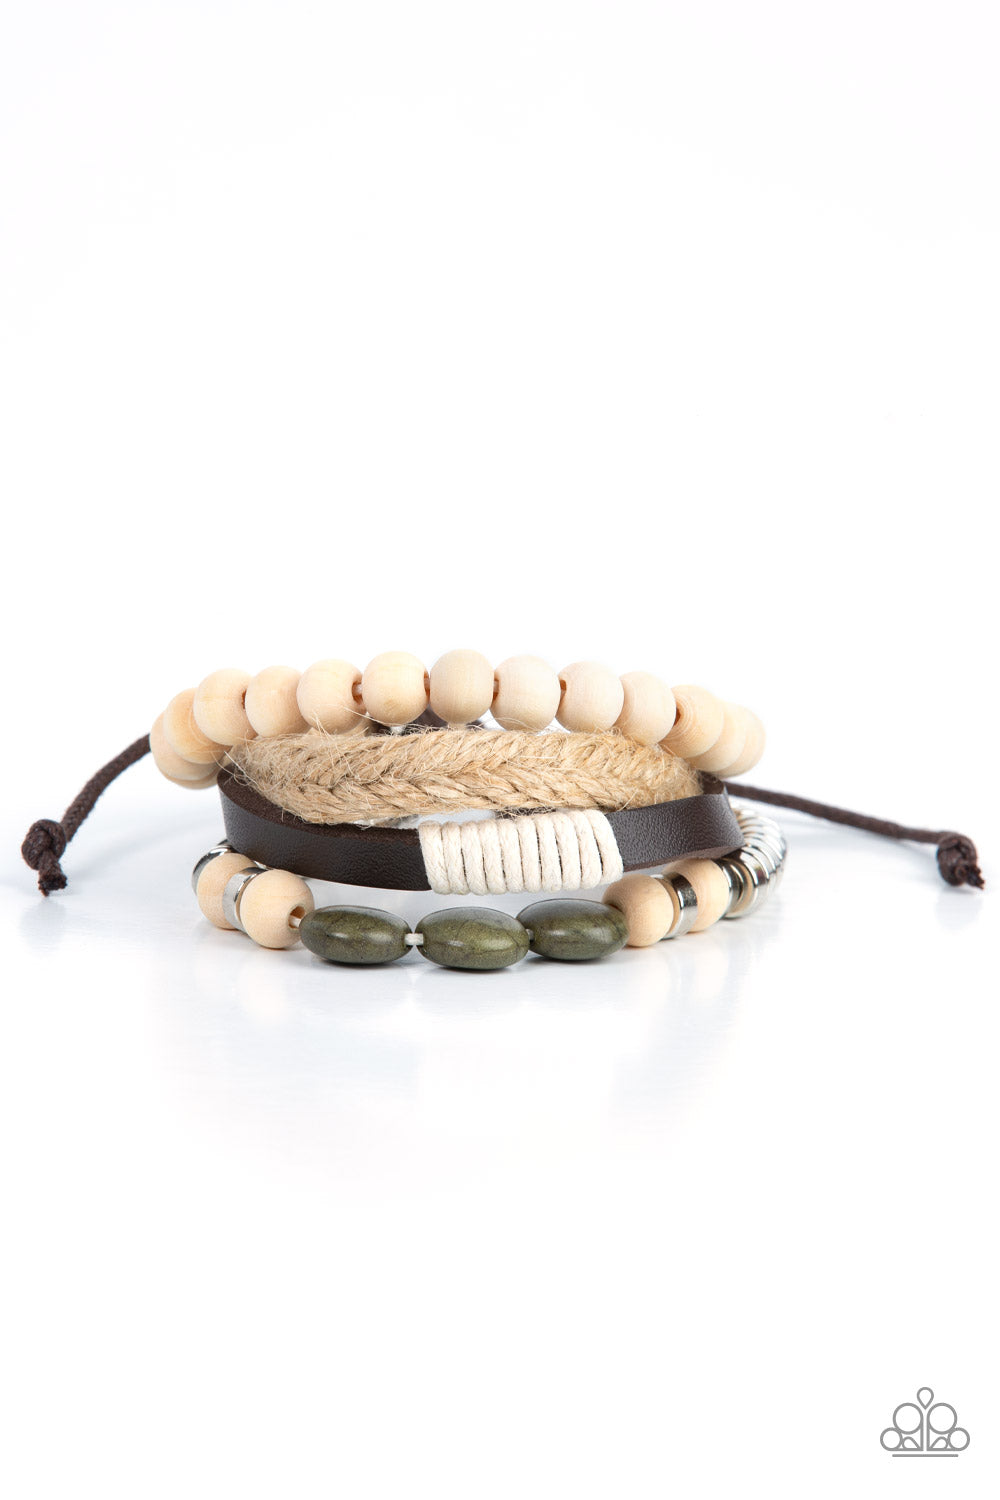 DRIFTER Away - Green and White Beaded Brown Leather Bracelet